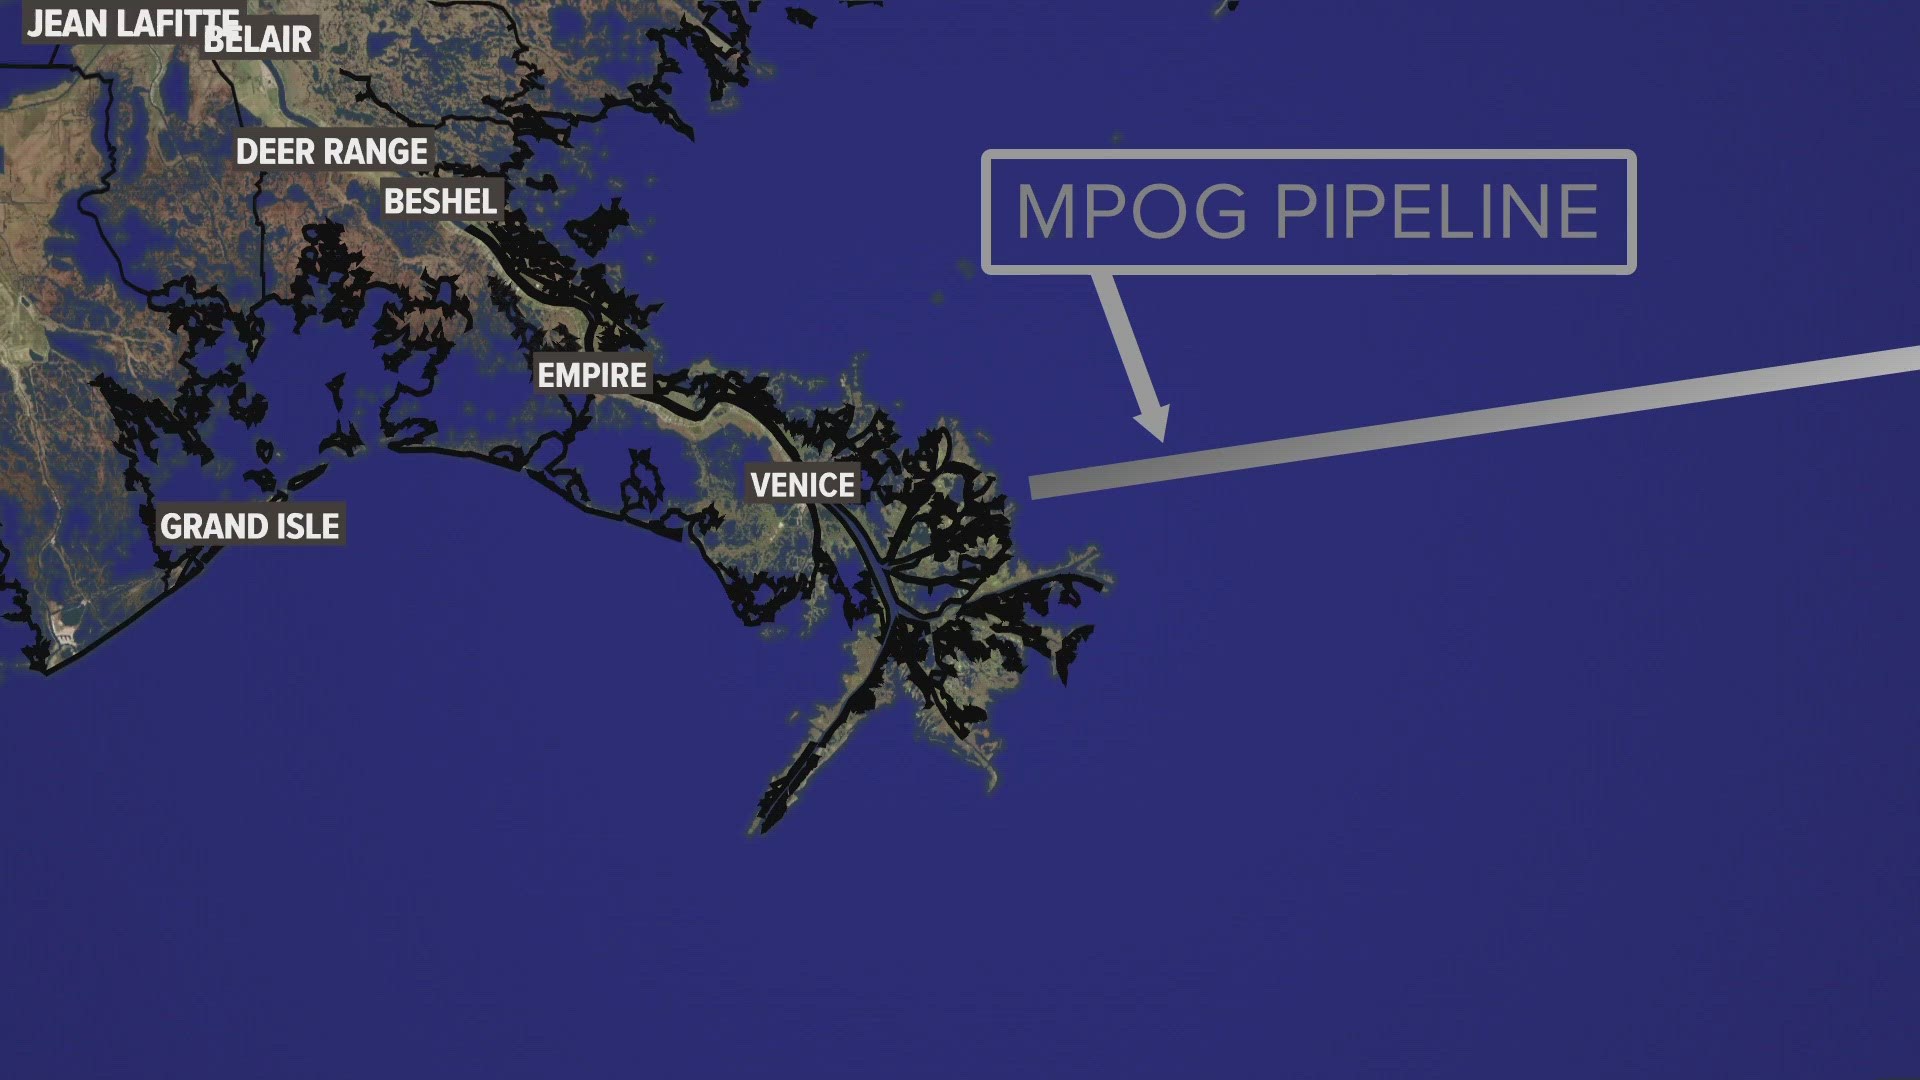 U.S. Coast Guard and NOAA say the oil spilled into the Gulf of Mexico from the Main Pass Oil Gathering Co. pipeline, 19 miles east of the mouth of Main Pass.